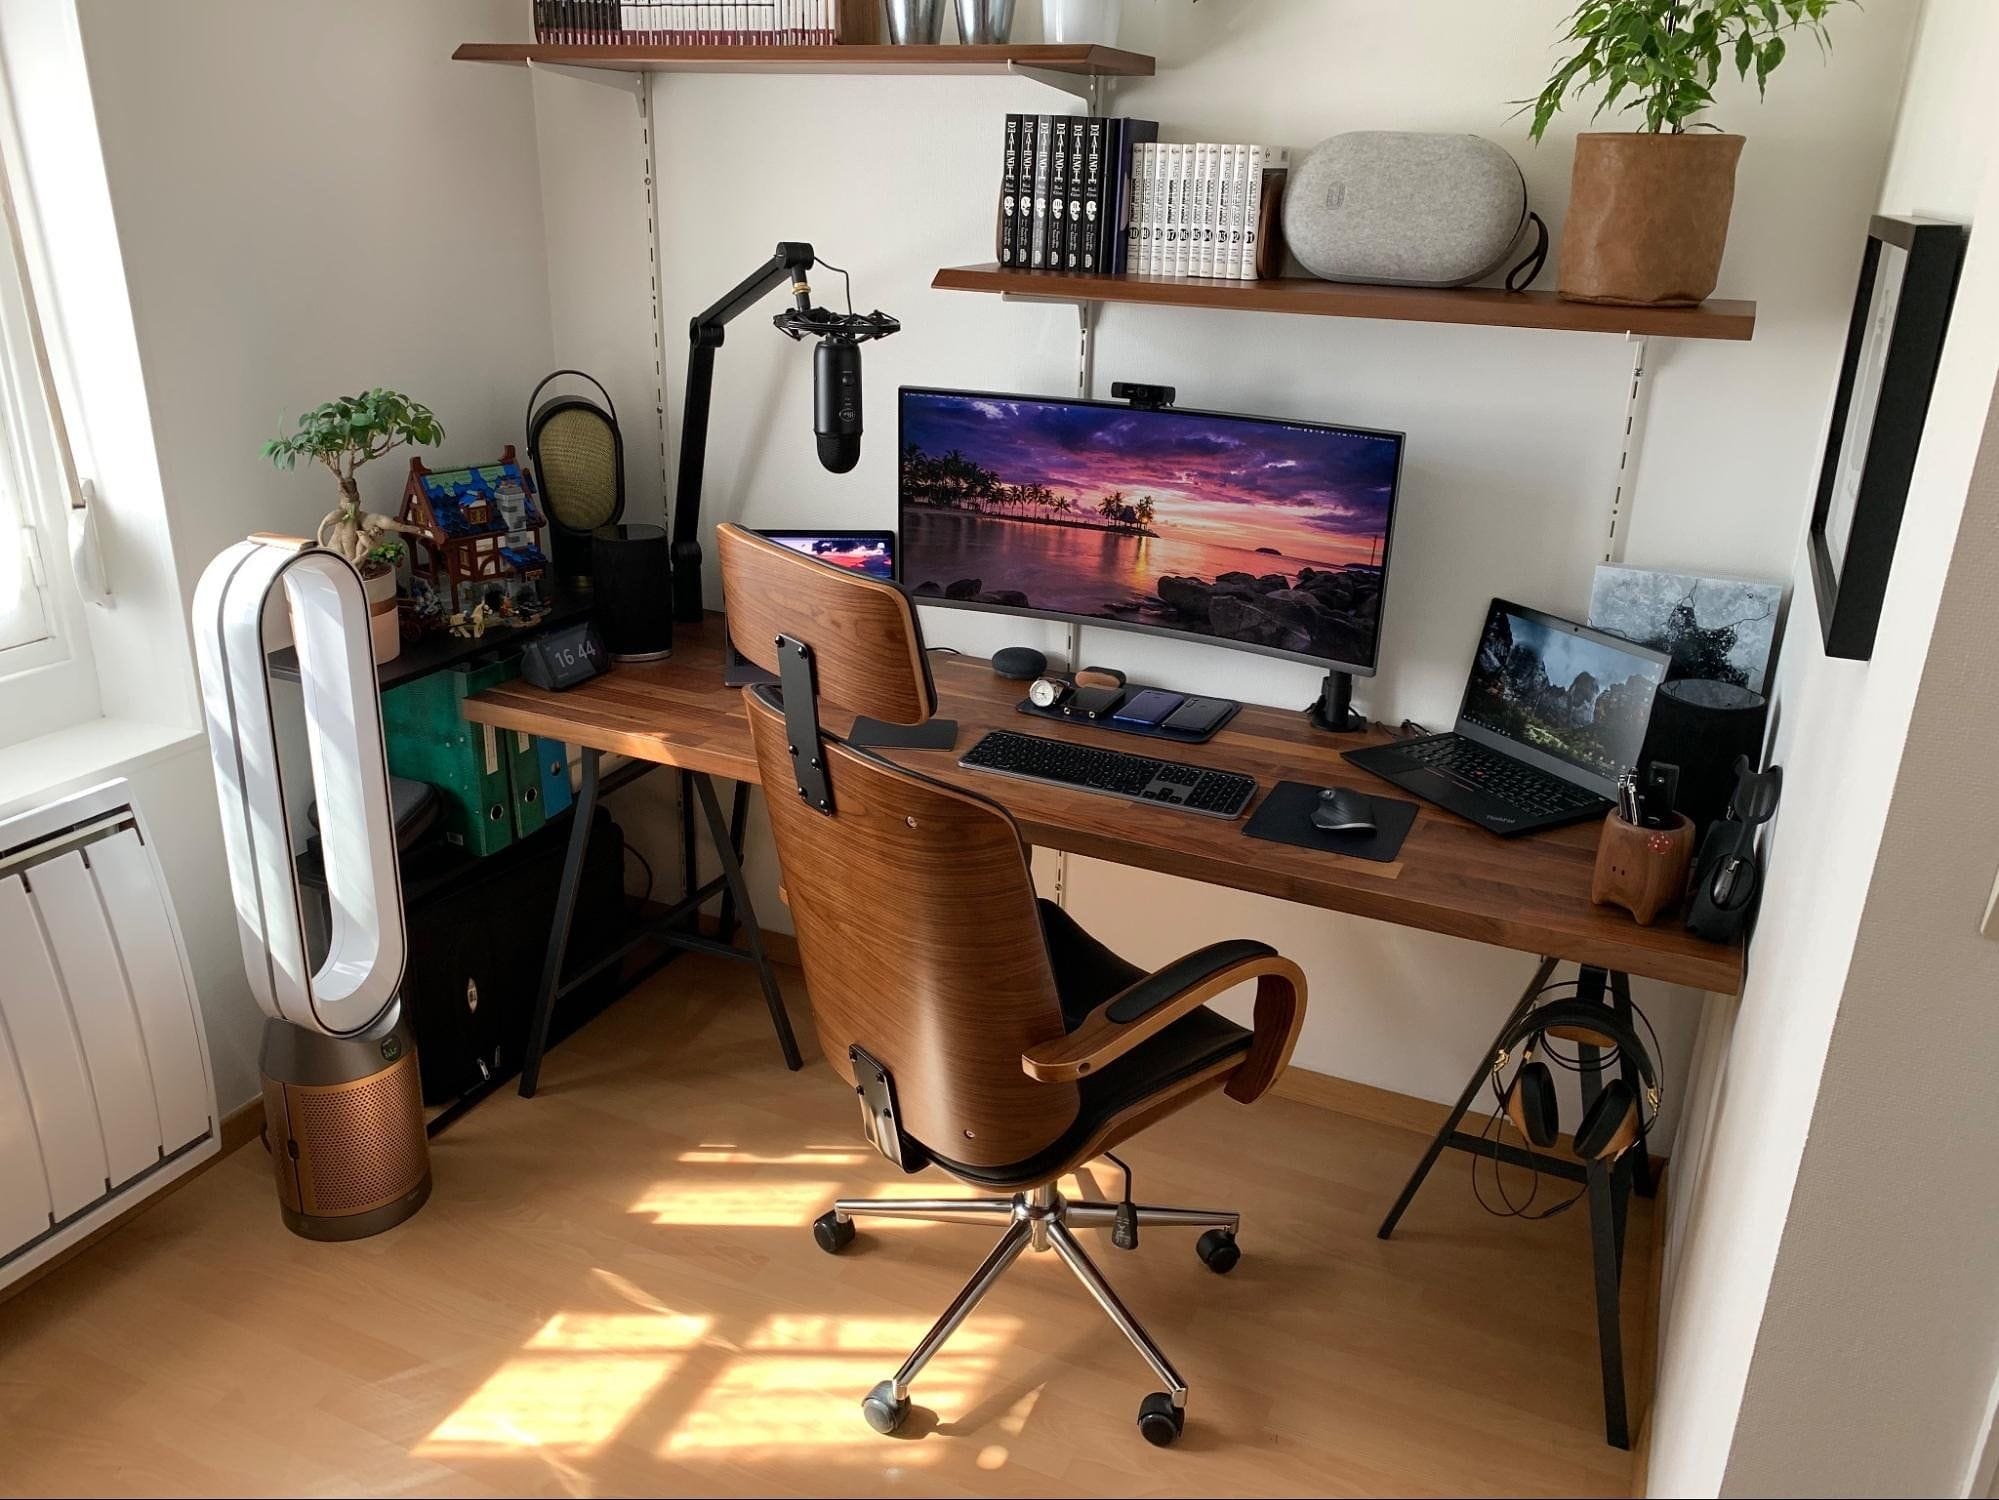 A well-organised desk setup with a wooden desk and chair, dual monitors, laptop, microphone, headphones, and various desk accessories in a room with natural lighting